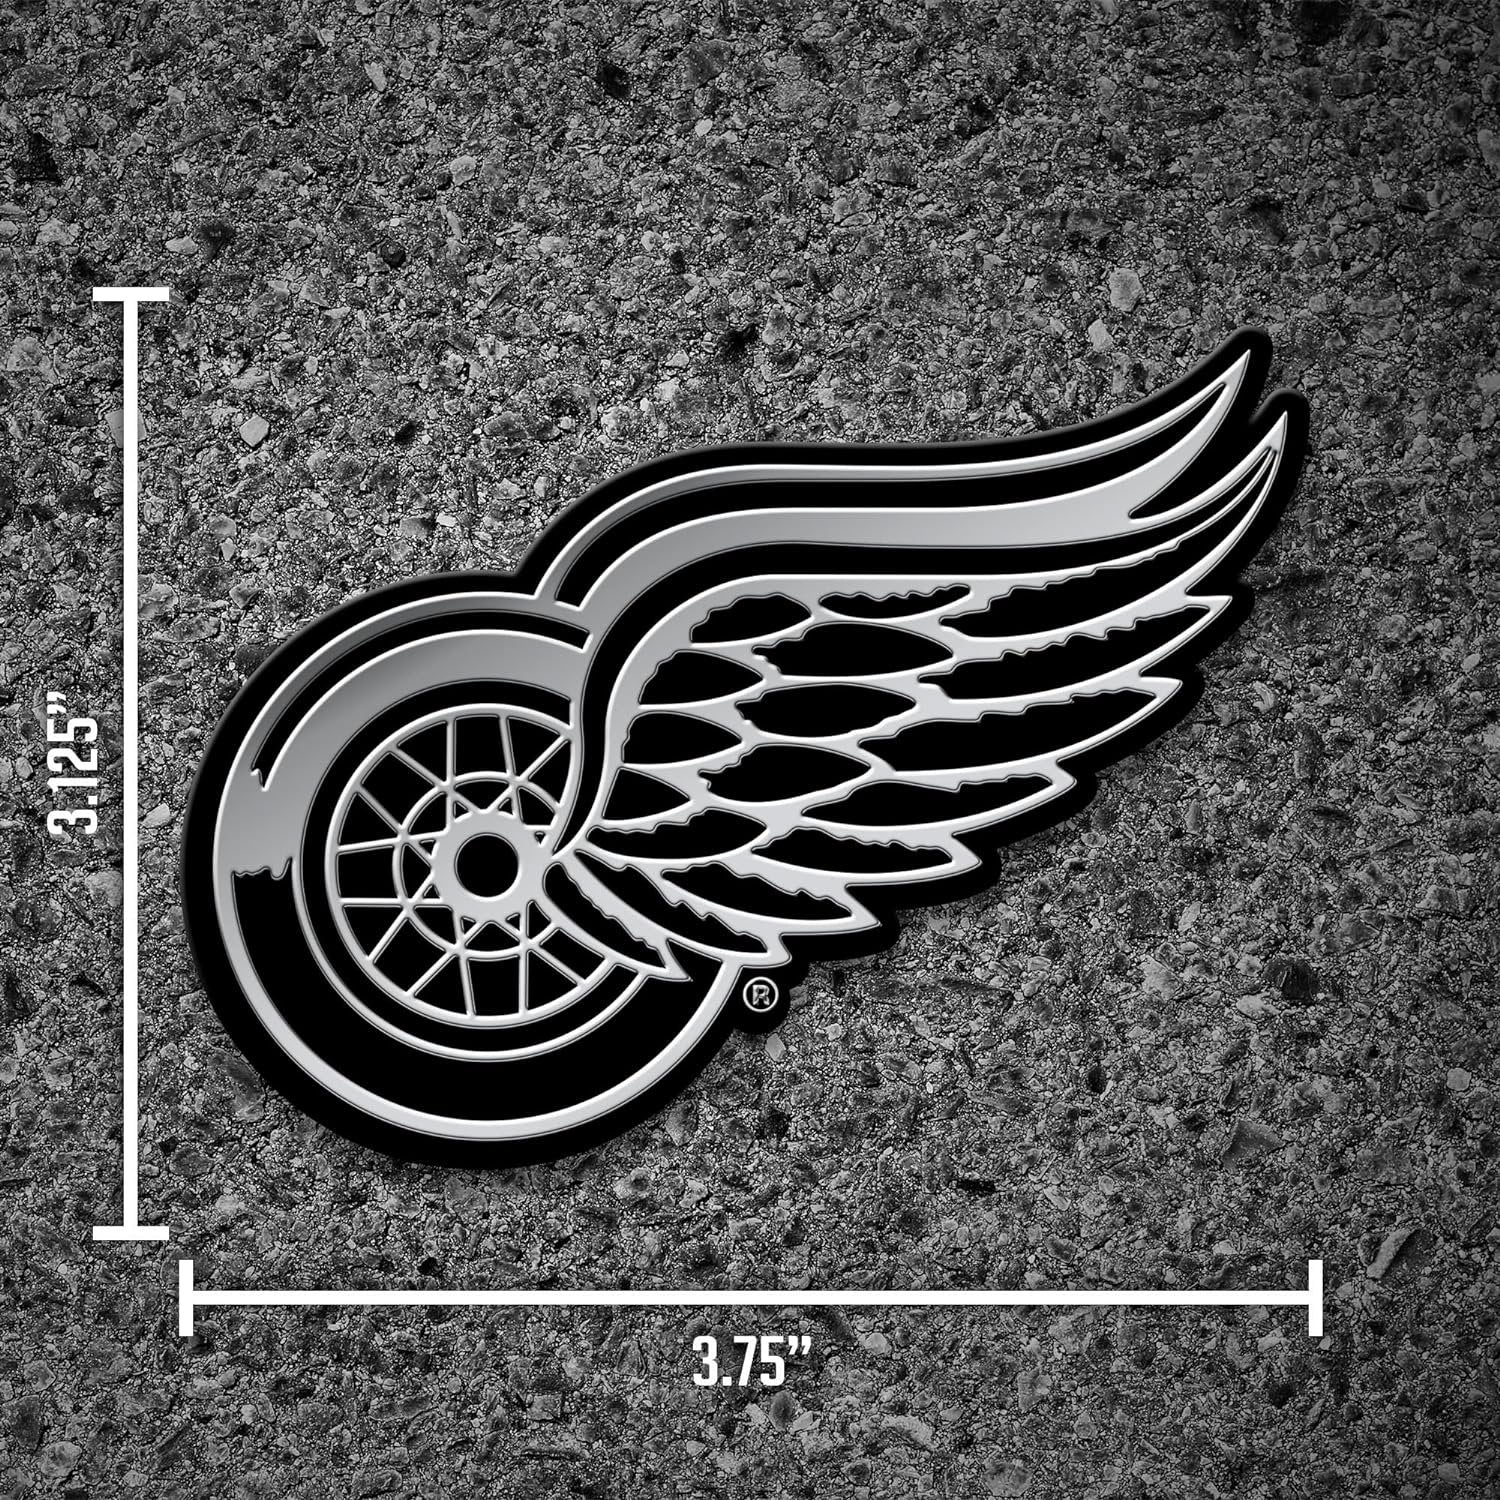 Detroit Red Wings Auto Emblem, Silver Chrome Color, Raised Molded Plastic, 3.5 Inch, Adhesive Tape Backing